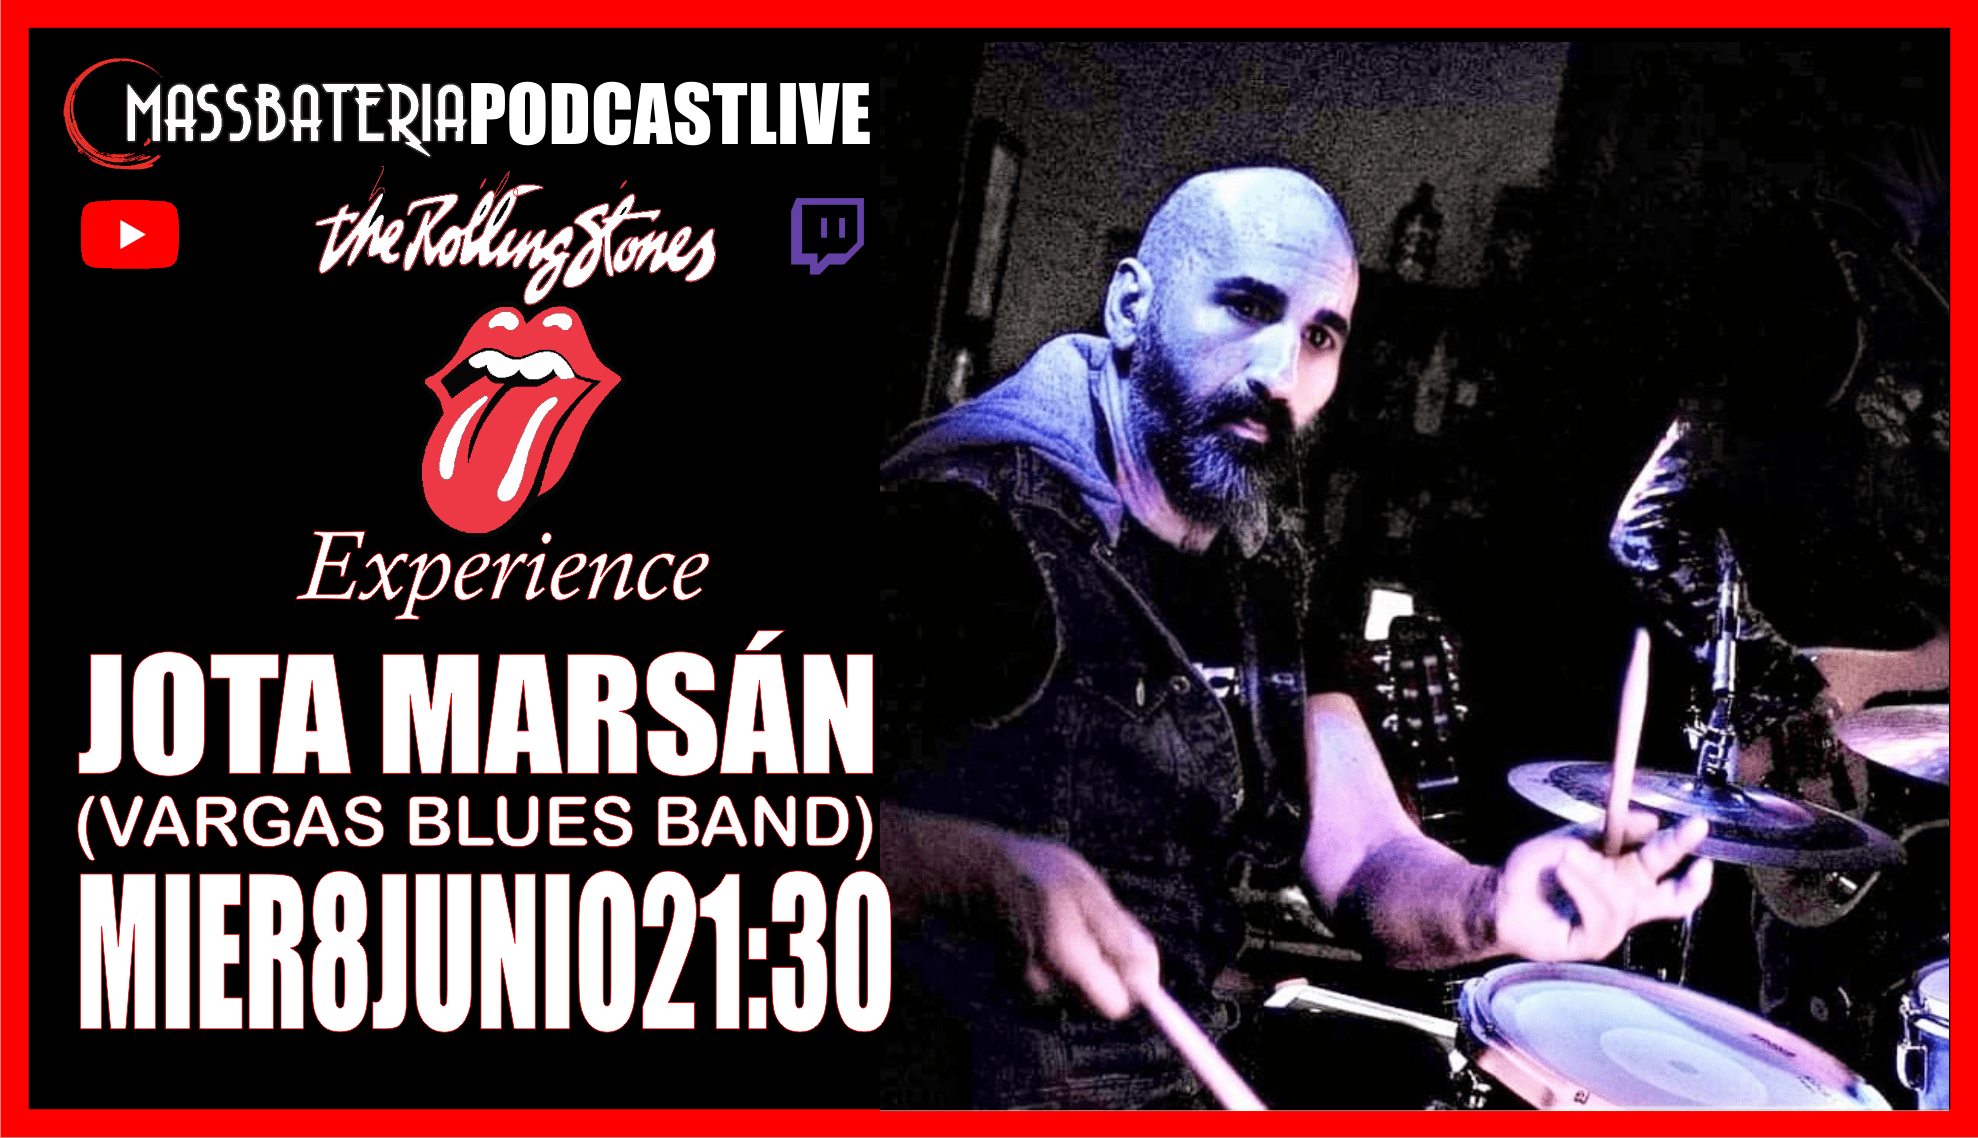 #70 MASSBATERIA PODCAST LIVE-ROLLING STONES XPERIENCE